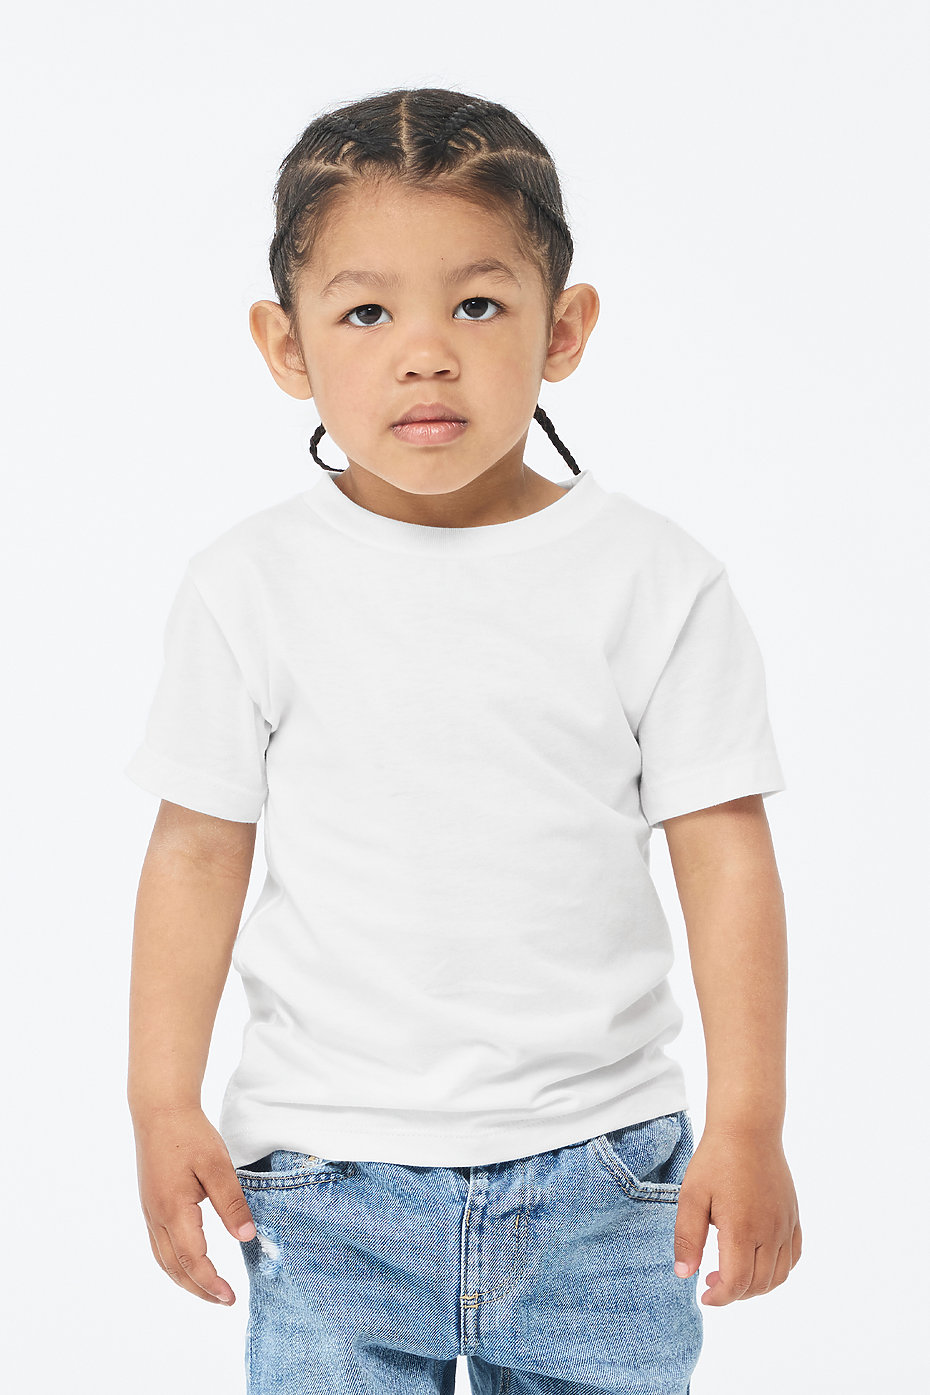 Wholesale Toddler Clothes, Toddler T Shirts